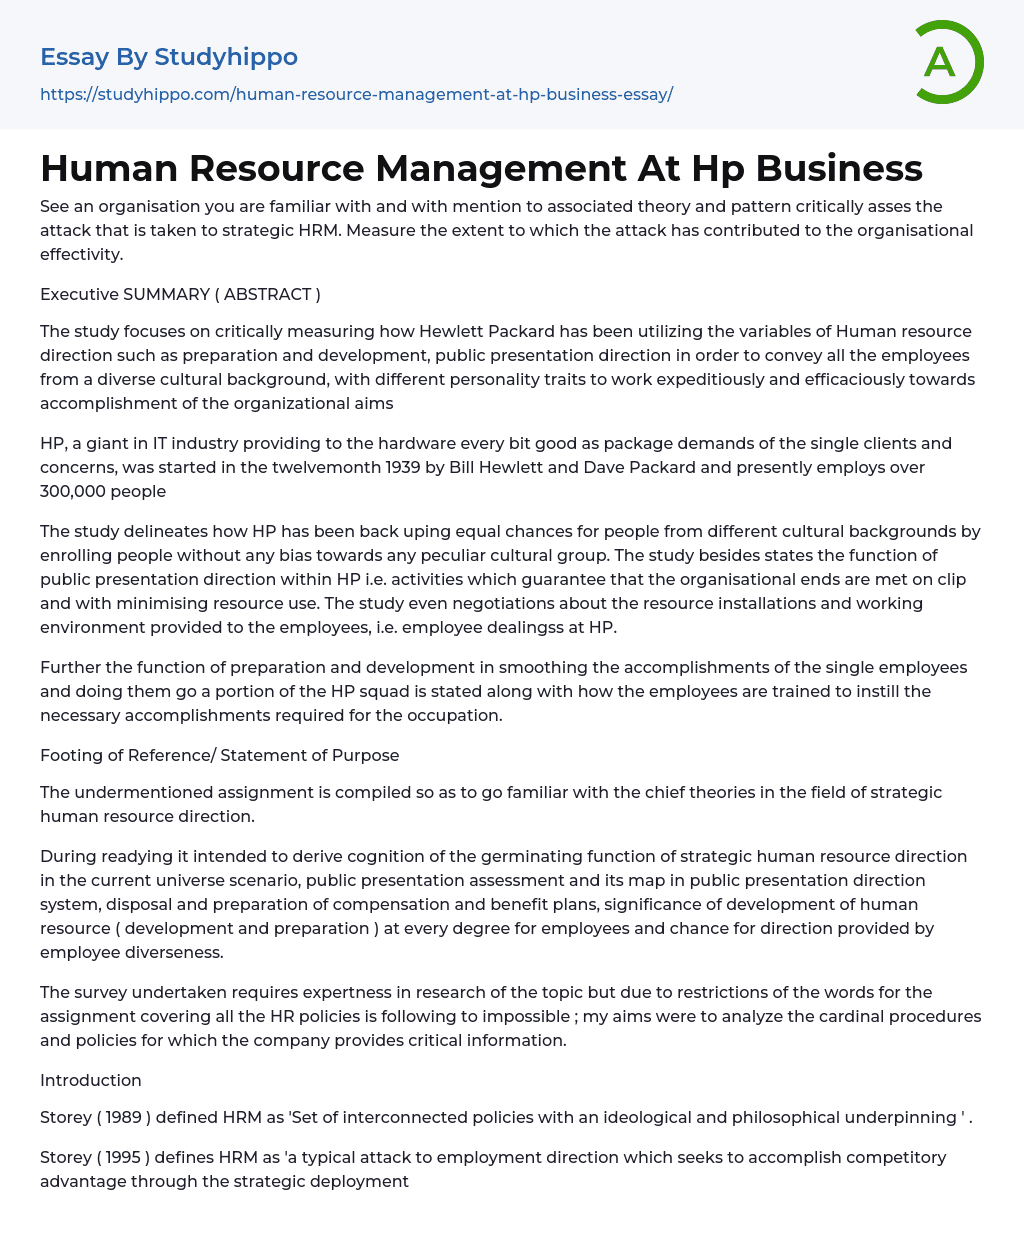 Human Resource Management At Hp Business Essay Example